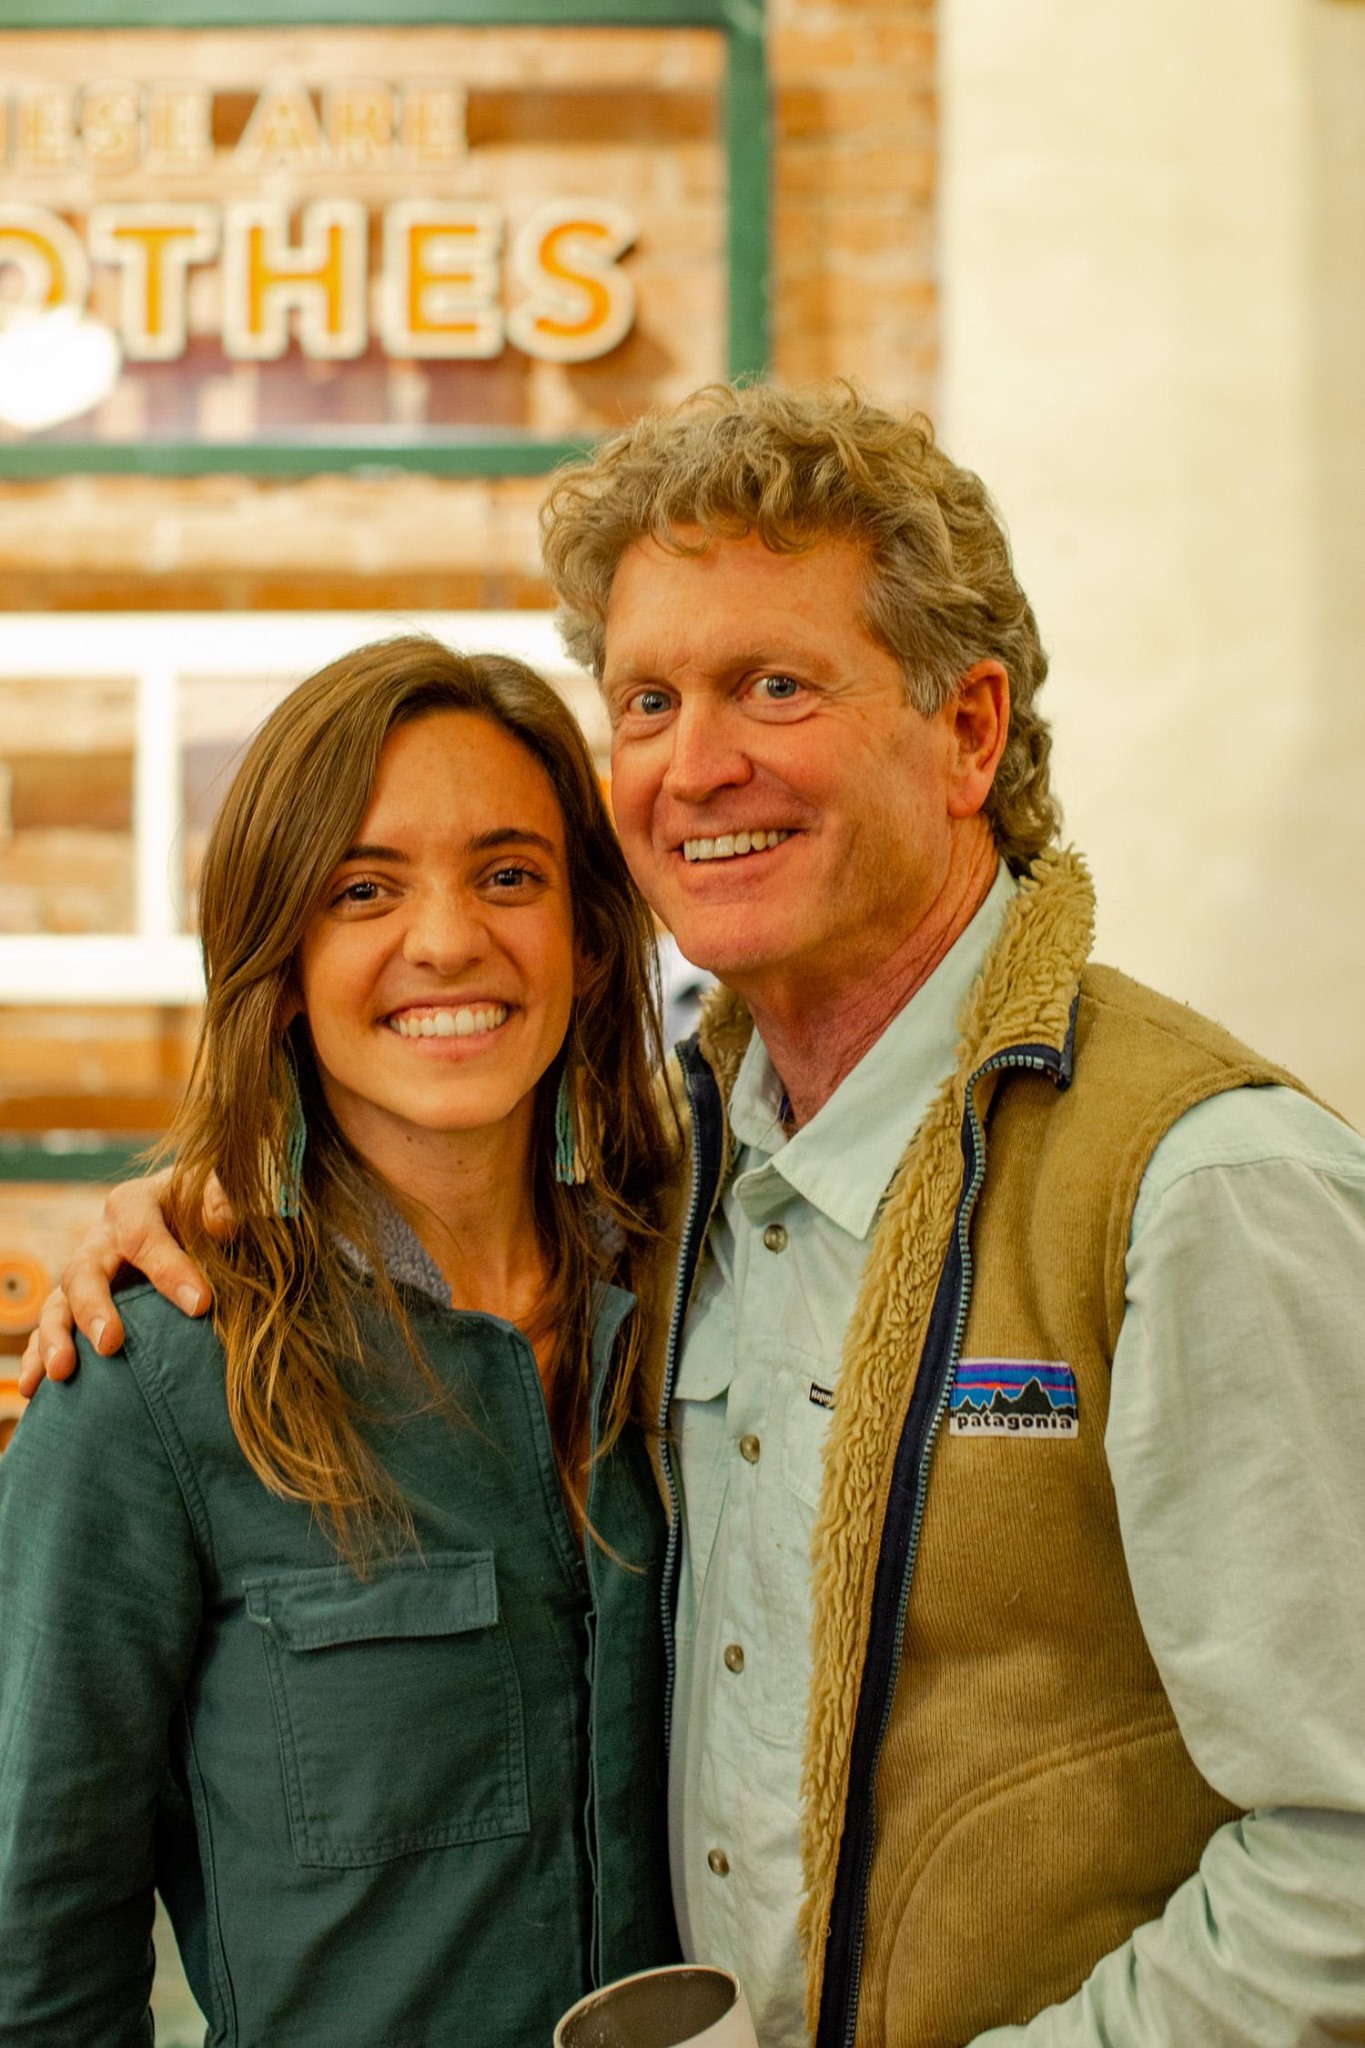 This is Patagonia Boulder store employee, Lauren, and her dad Jim